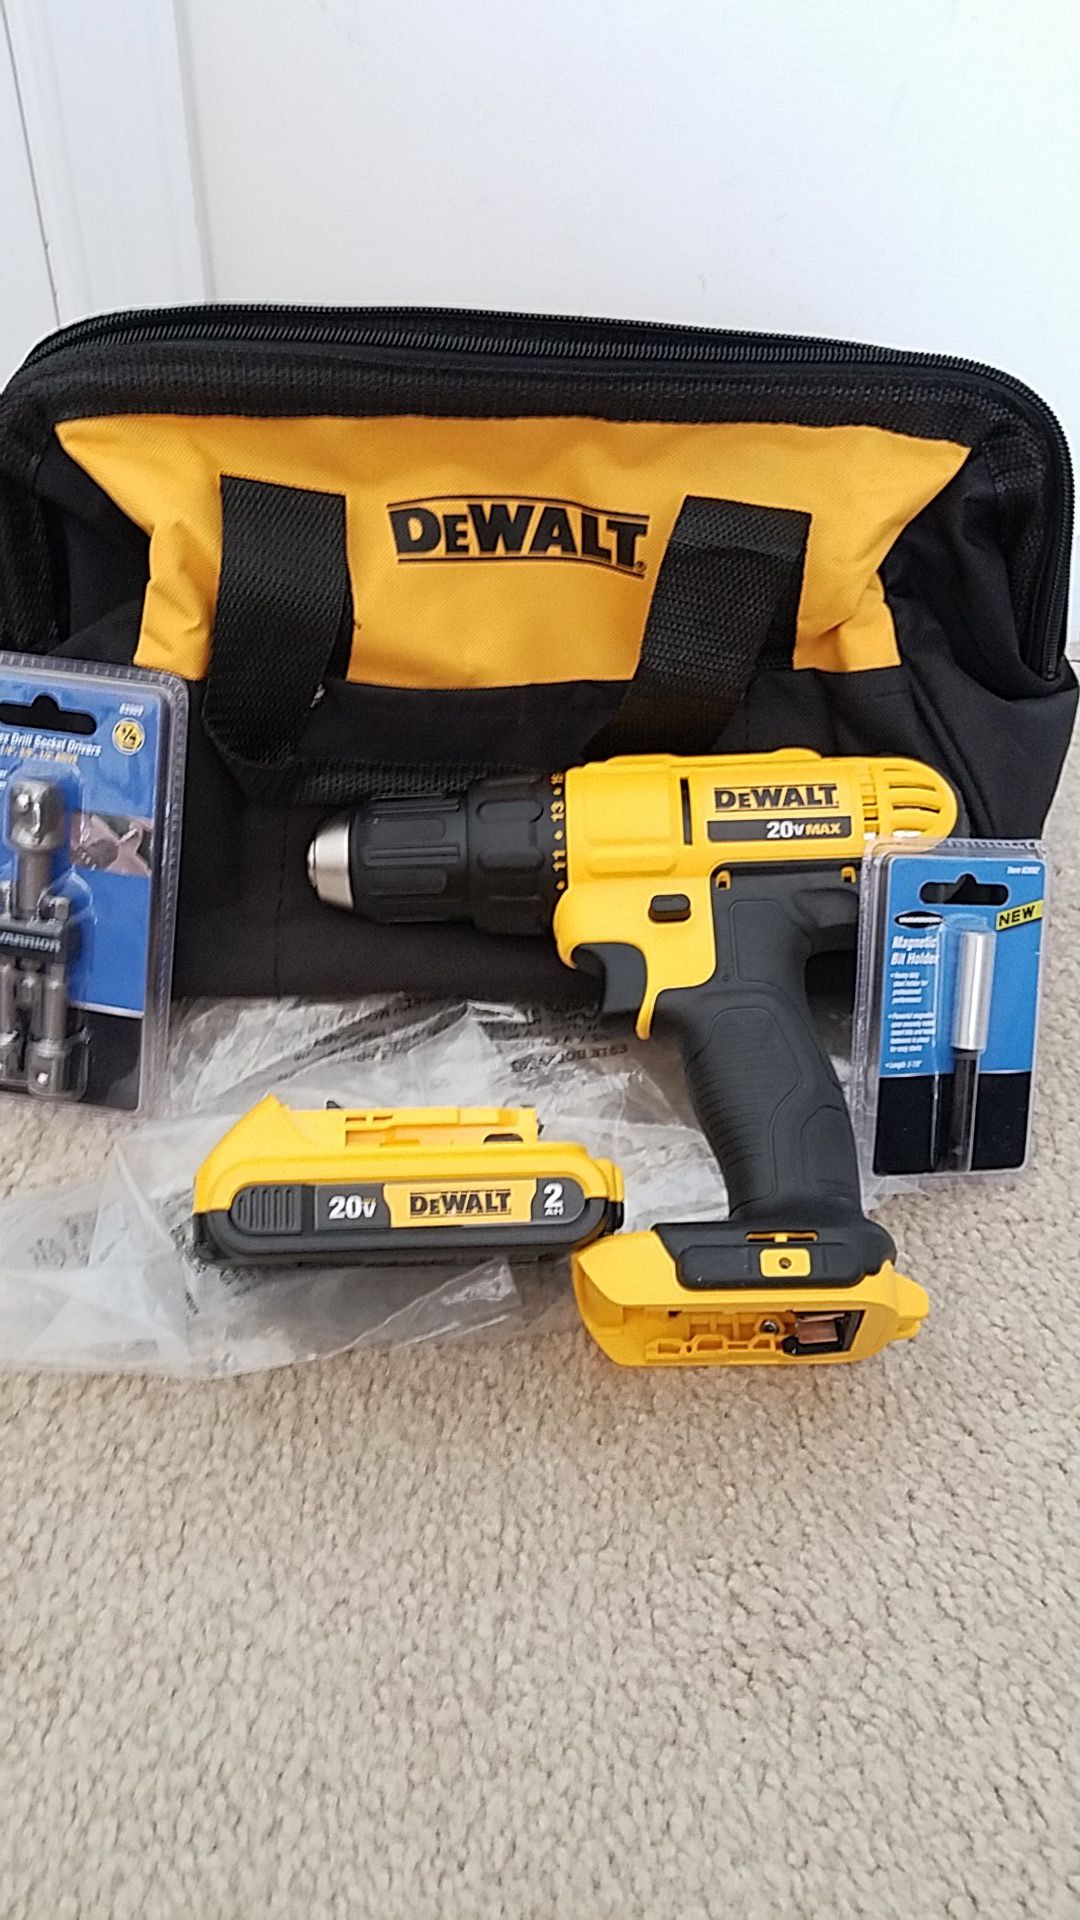 DEWALT 20v MAX drill/driver with battery and case